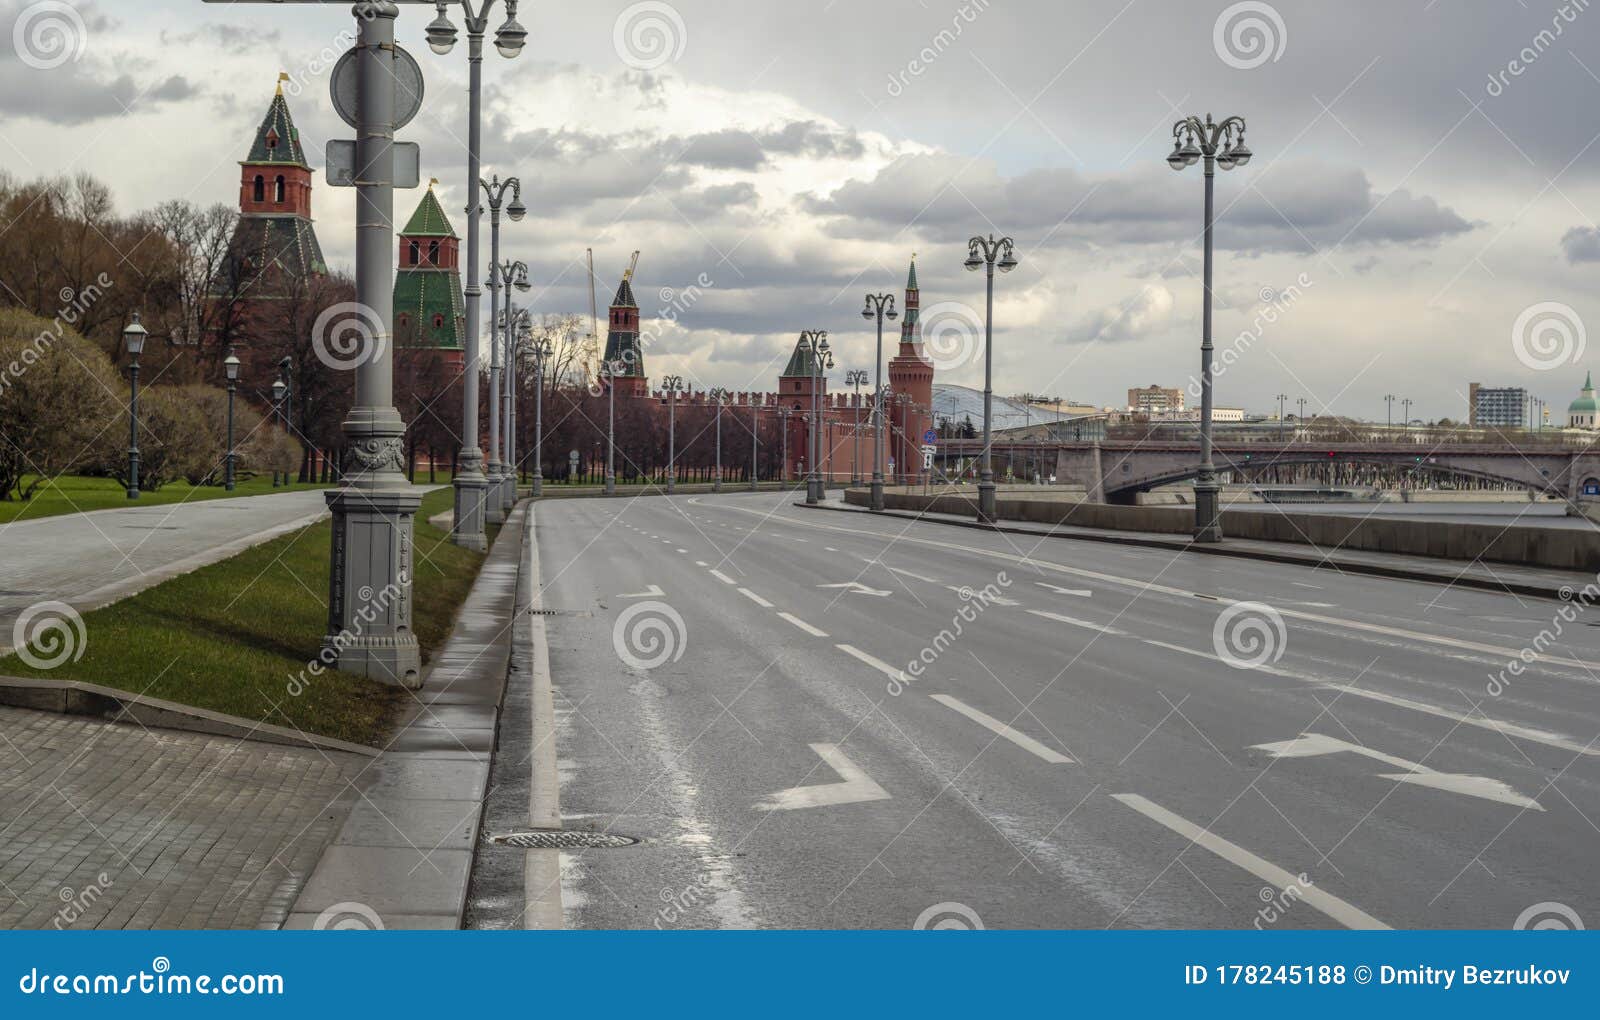 moscow, russia, april 5, 2020. coronavirus quarantine, covid-19, in moscow. empty streets in the city center.